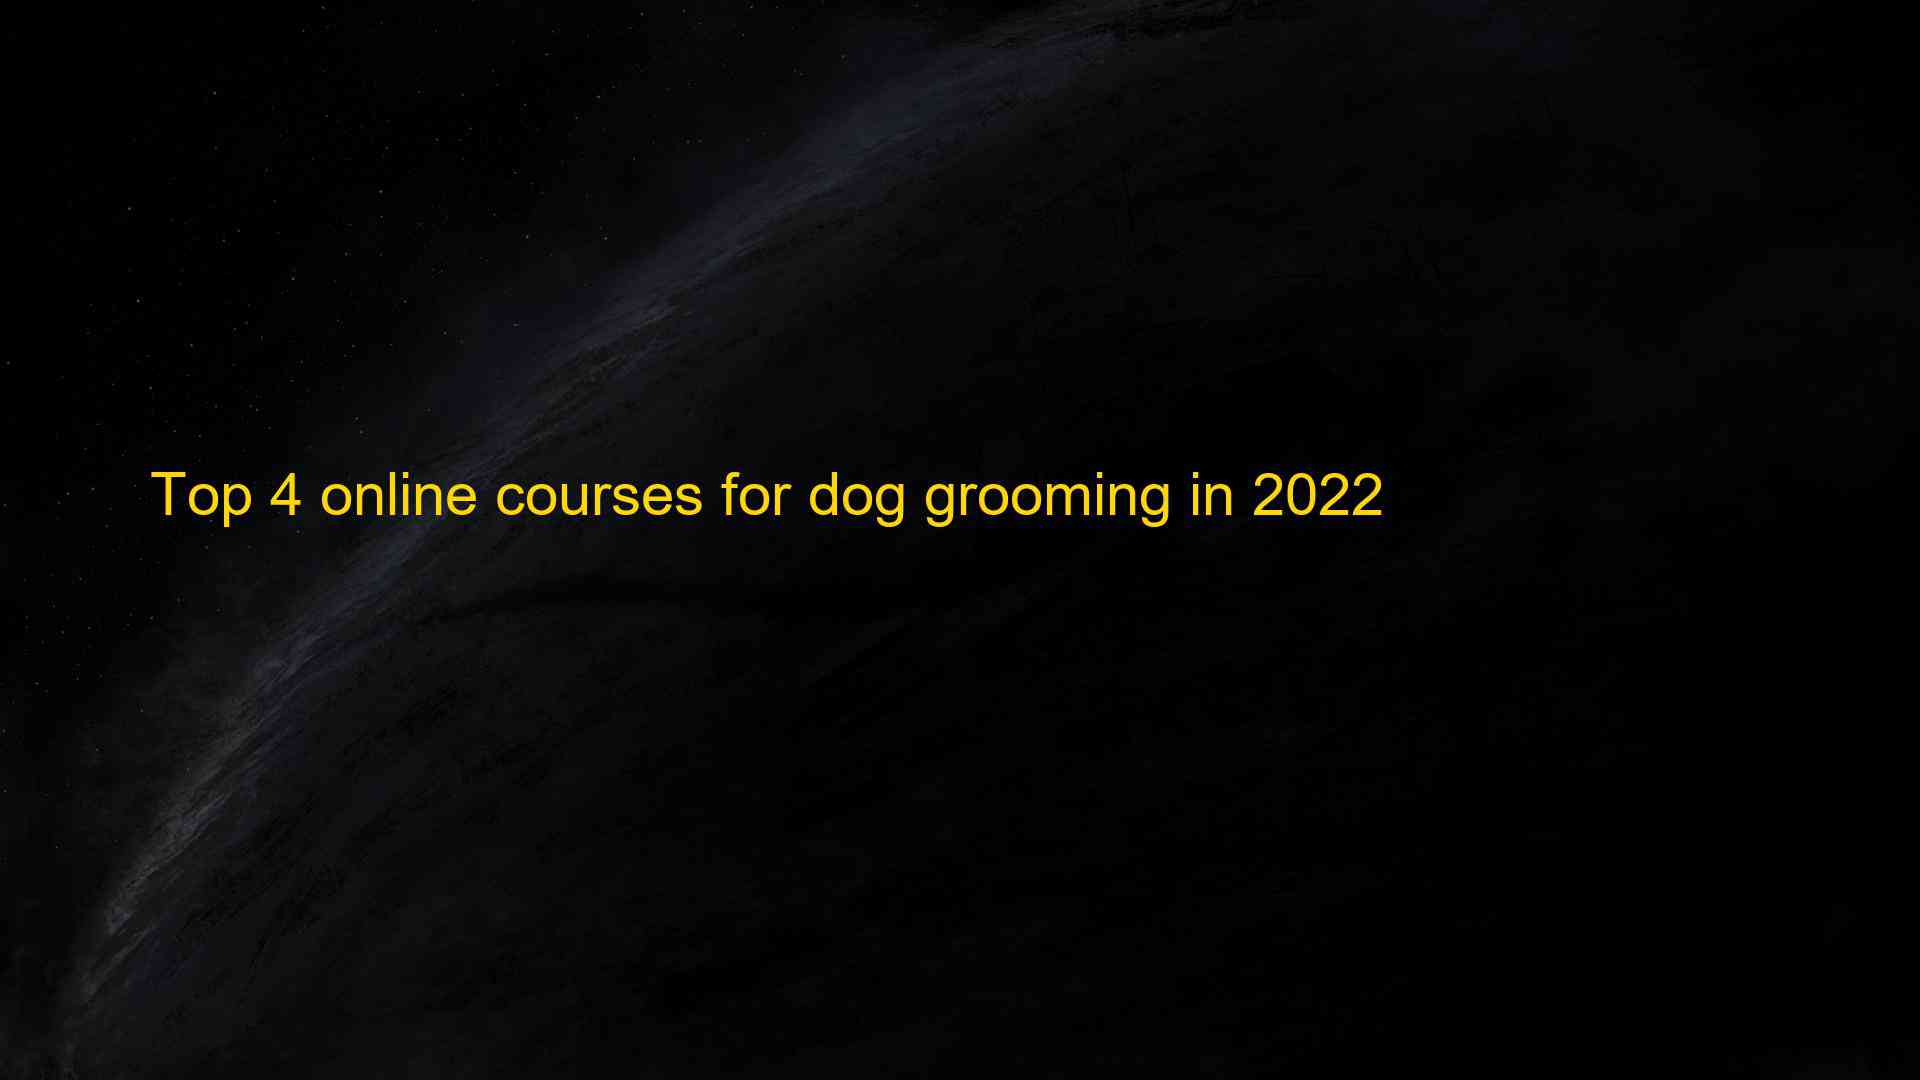 Top 4 online courses for dog grooming in 2022 1661927584